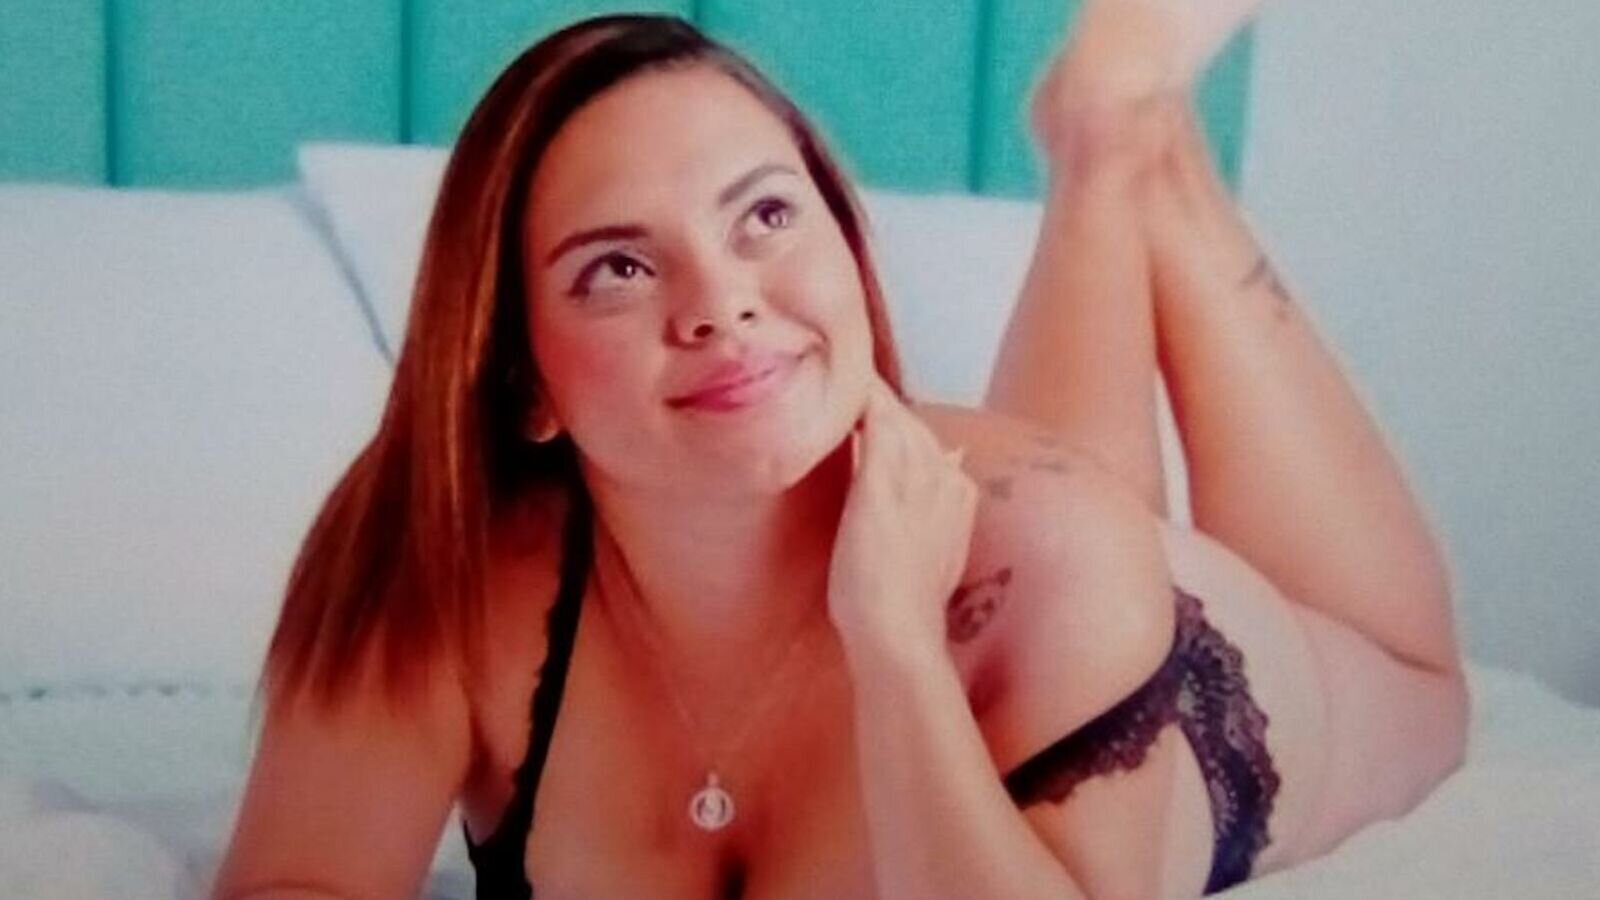 Porn Chat Live with CamilaPorto